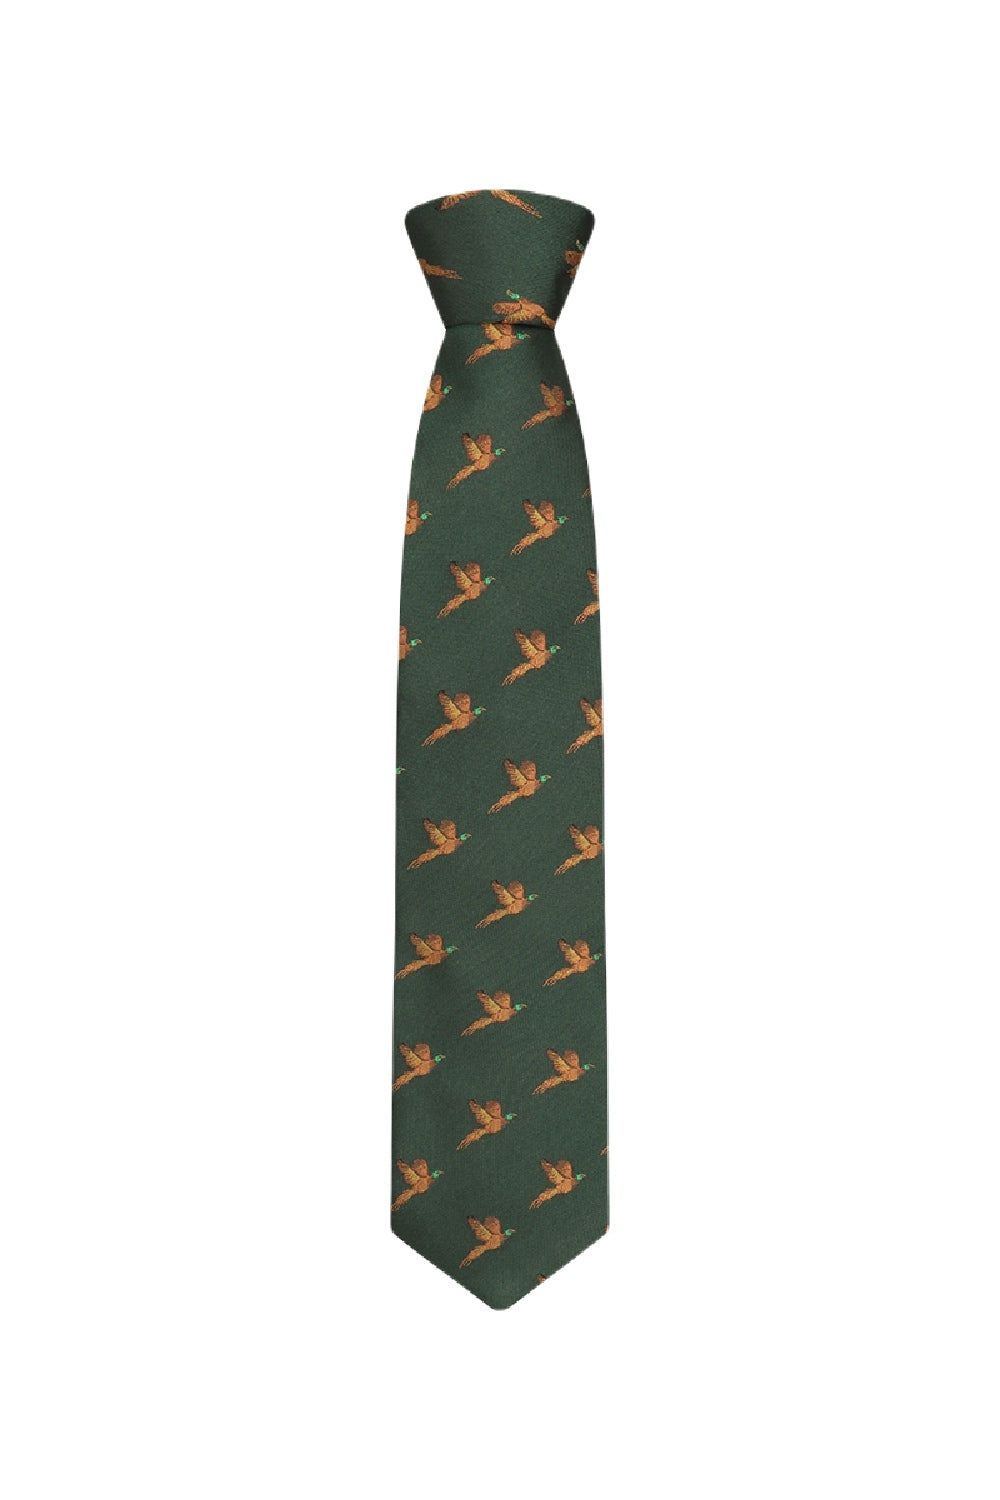 Hoggs of Fife 100% Silk Woven Tie Pheasants Boxed in Green 